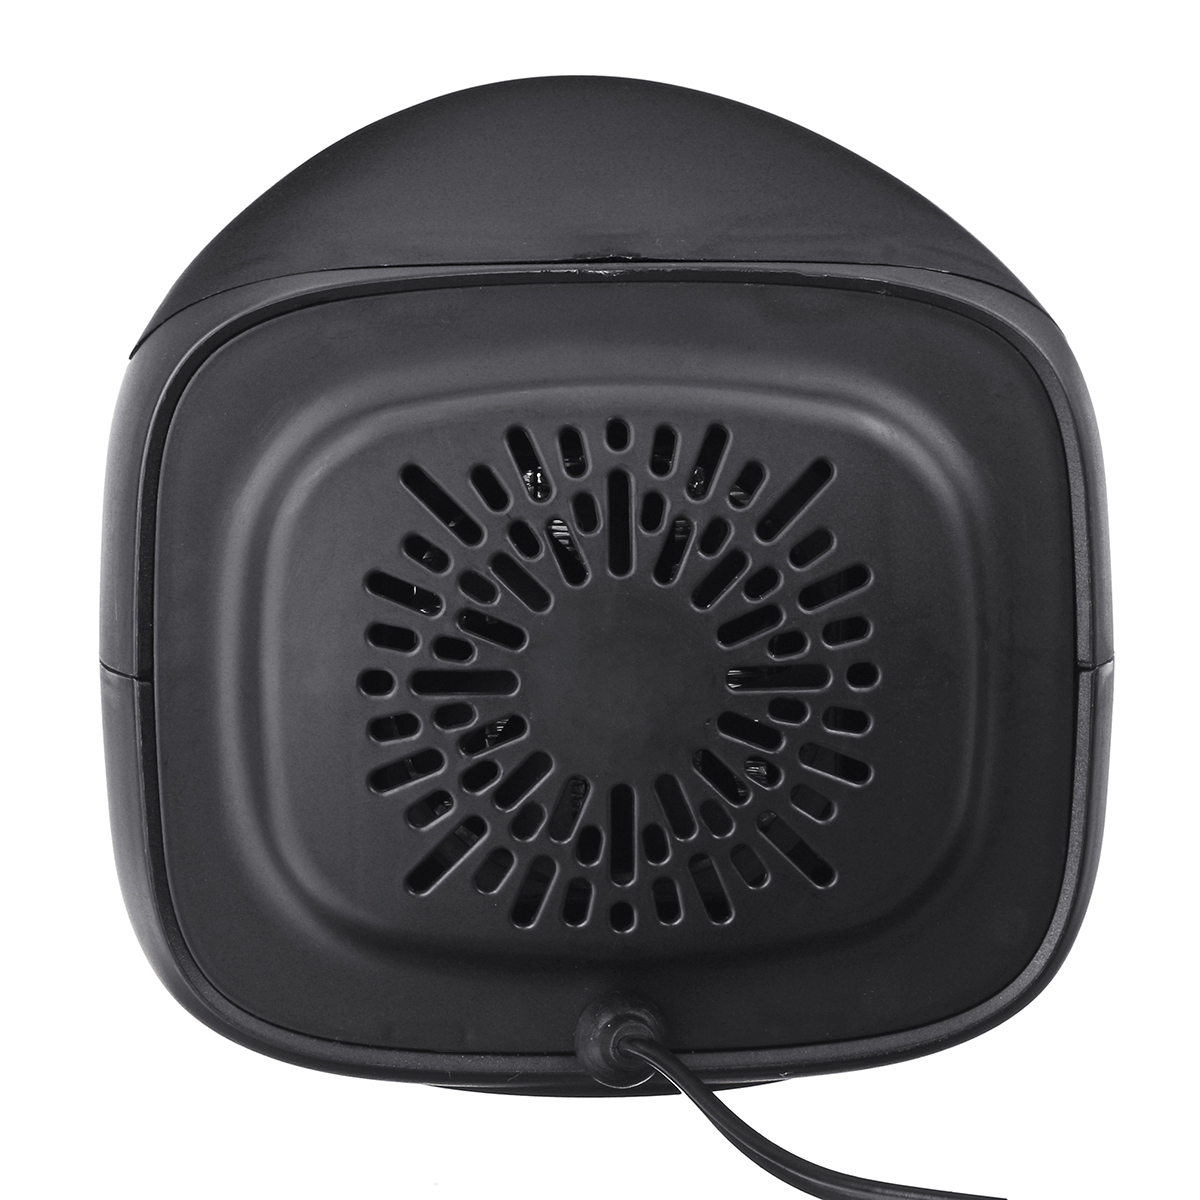 Find 800W 110V/220V Mini Ceramic Electric Heater Home Office Space Heating Warm/Cold Fan Silent for Sale on Gipsybee.com with cryptocurrencies